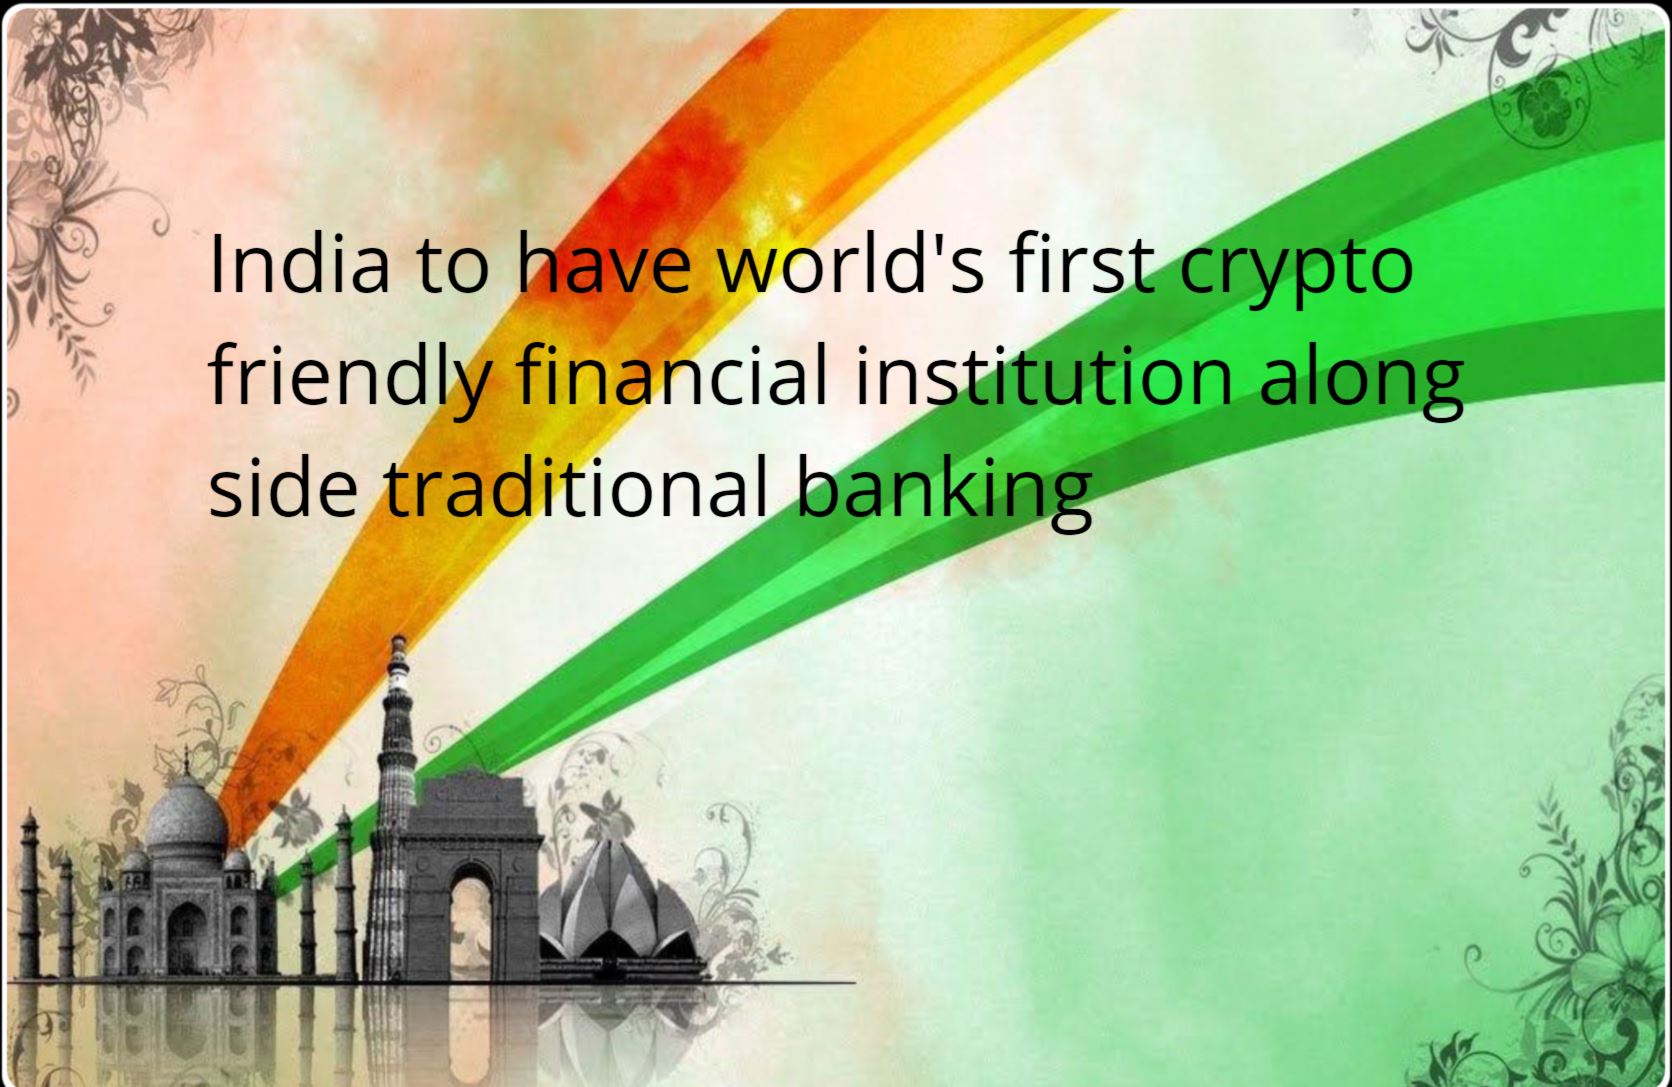 CRYPTONEWSBYTES.COM India-Crypto India to have world's first crypto friendly financial institution along side traditional banking  